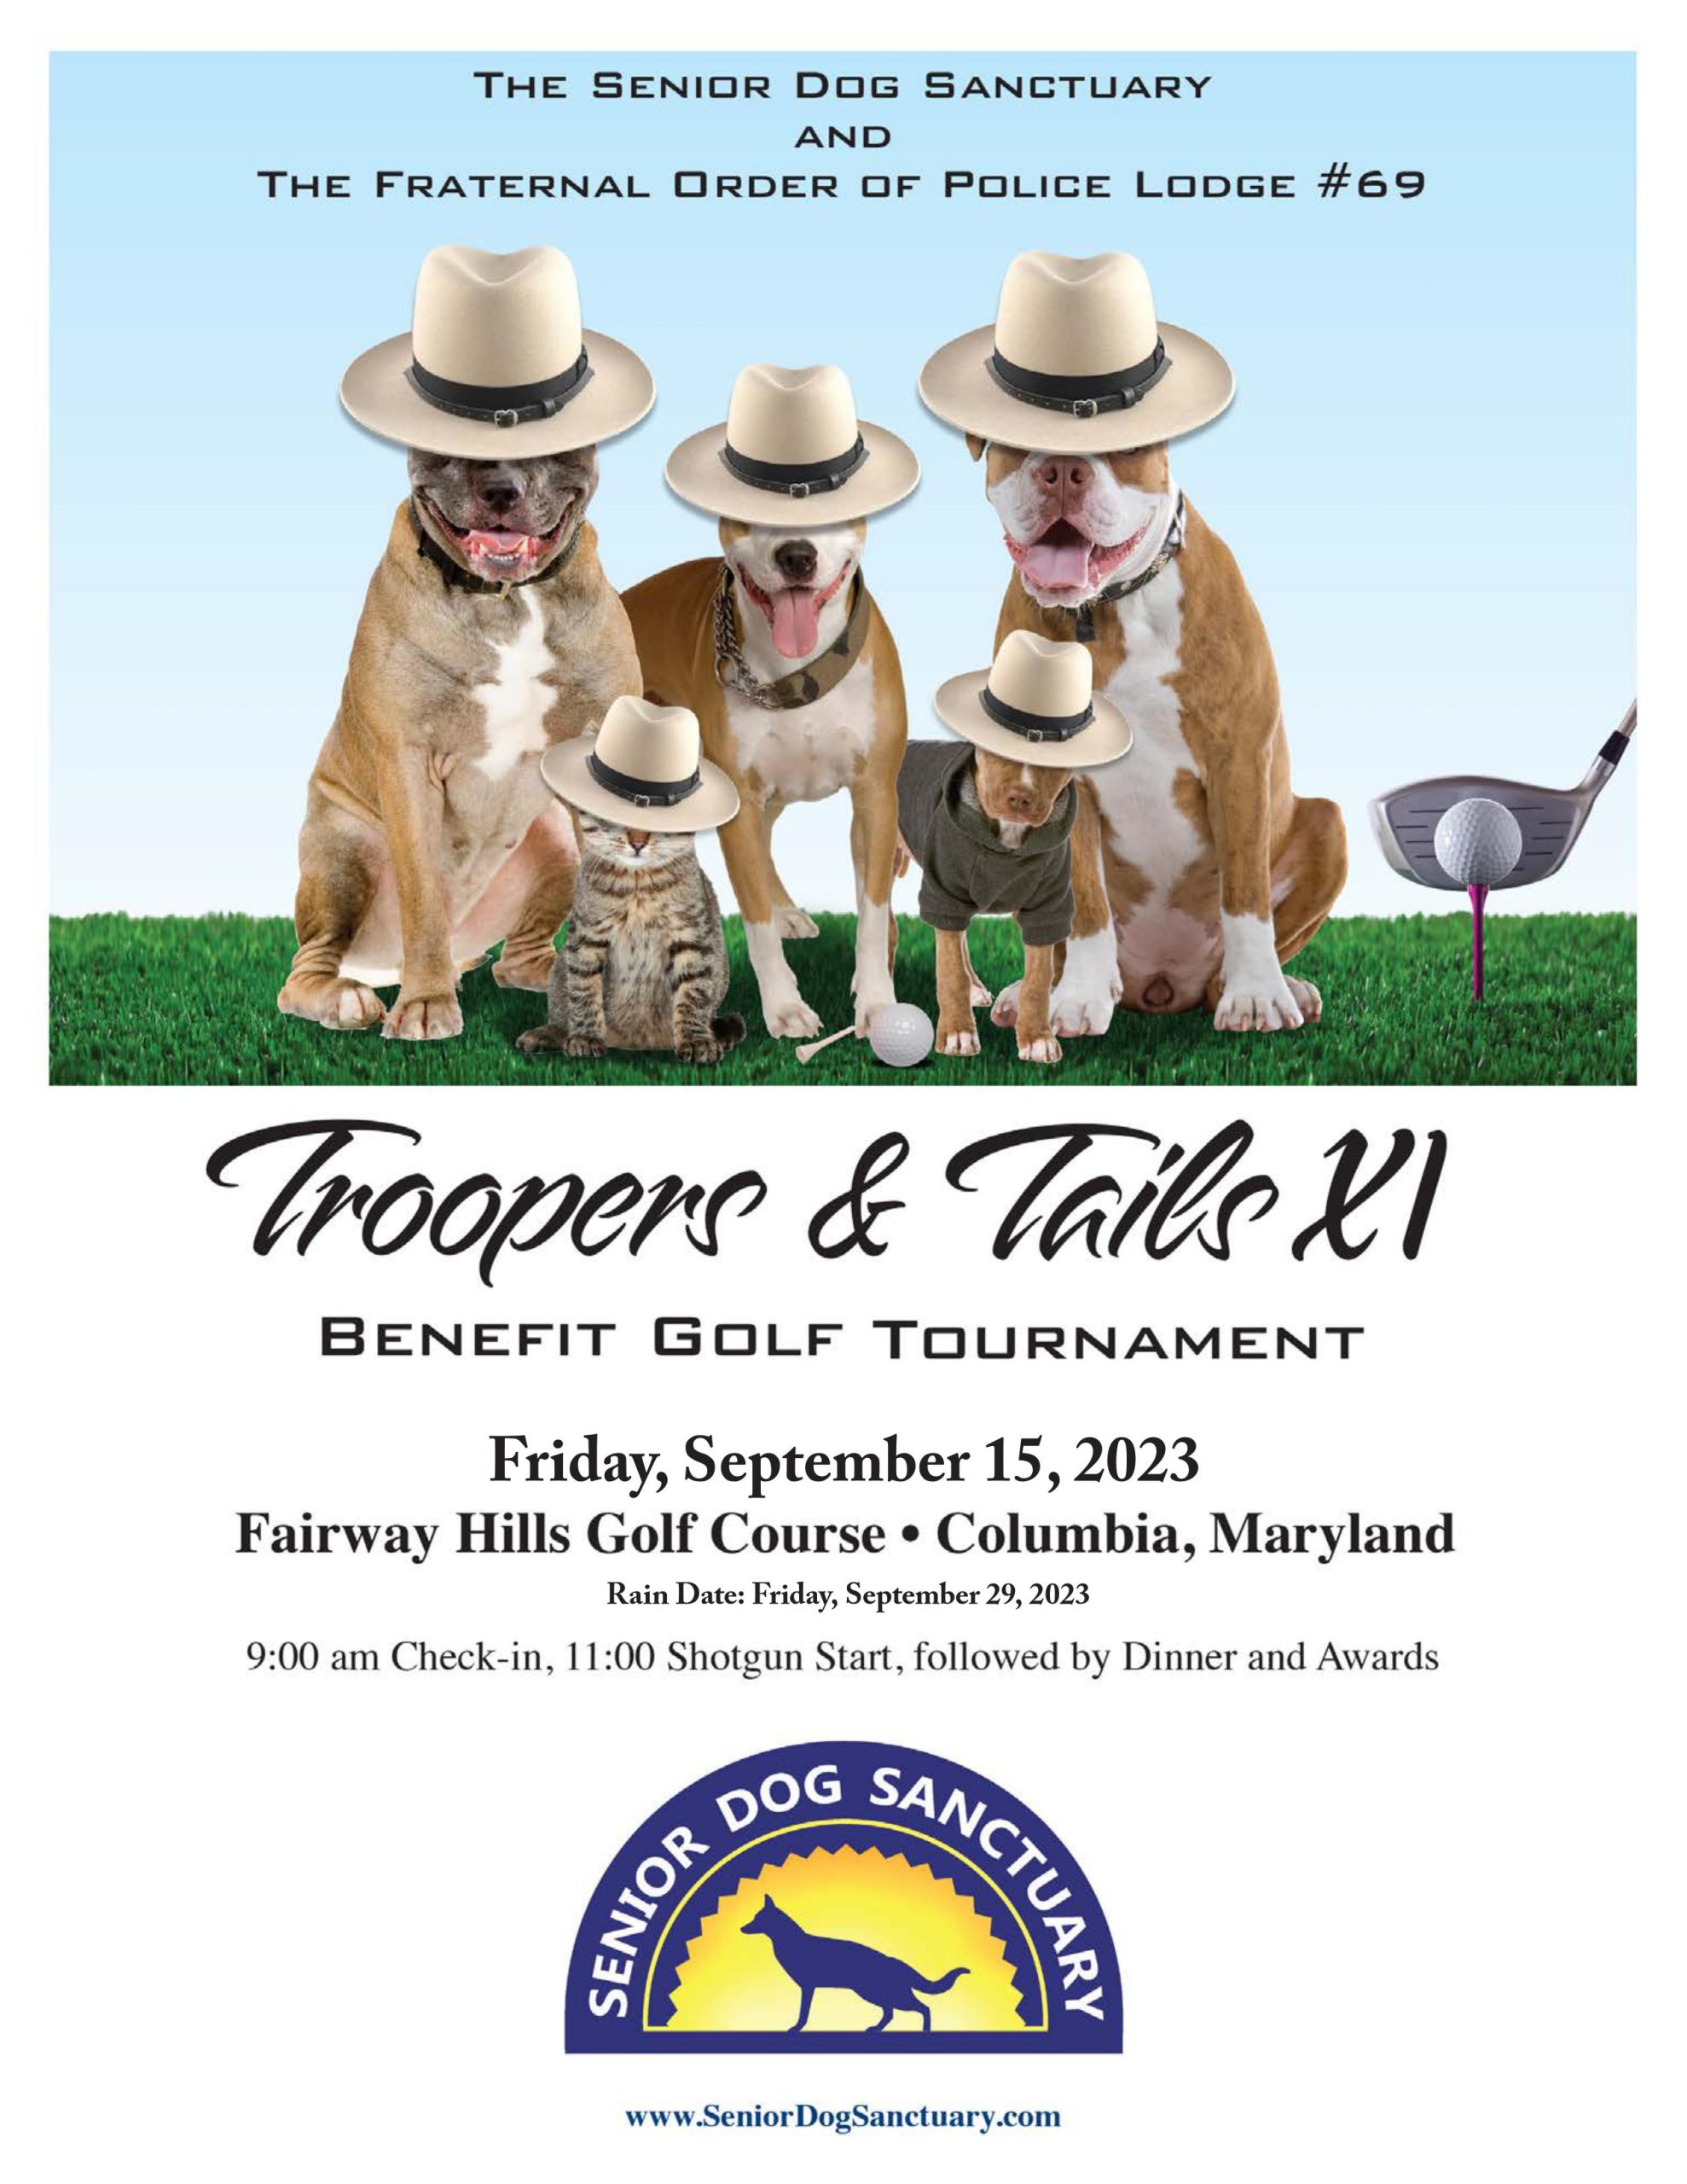 CertaPro Painters of Annapolis is a proud sponsor of the 11th Annual Troopers & Tails Golf Tournament